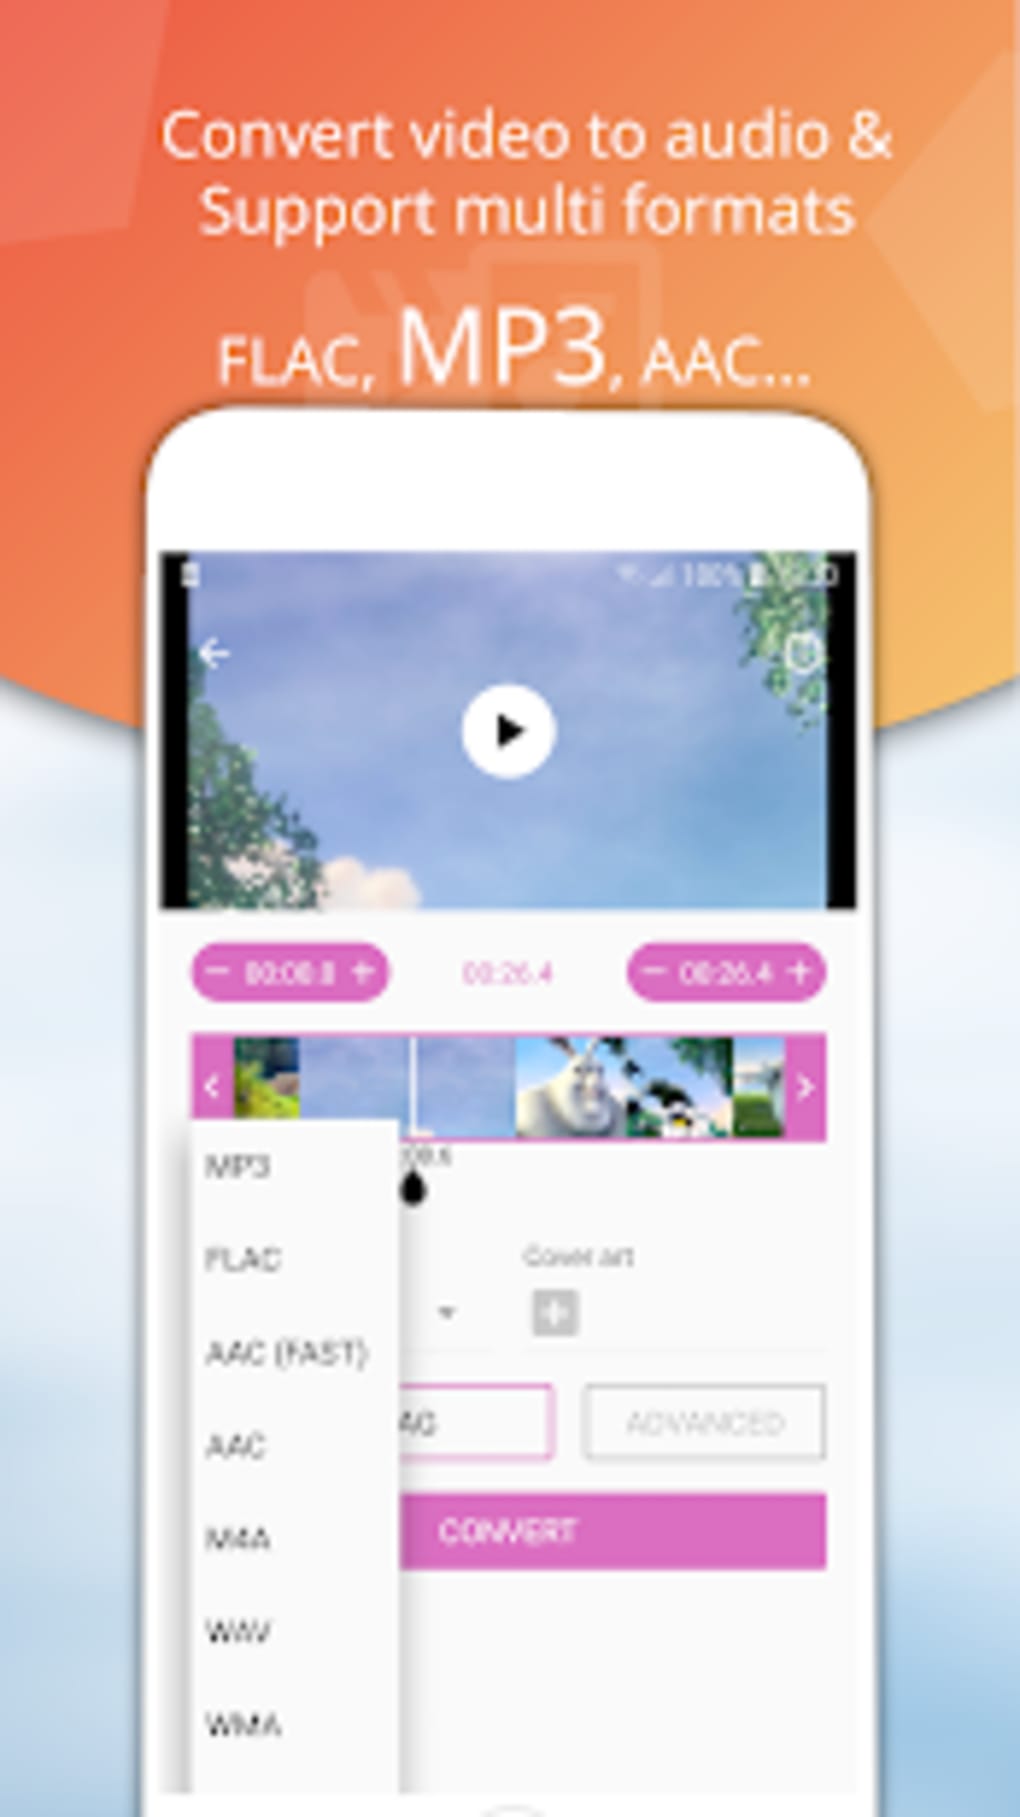 MP3 Converter - Convert  Videos to MP3 APK (Android App) - Free  Download